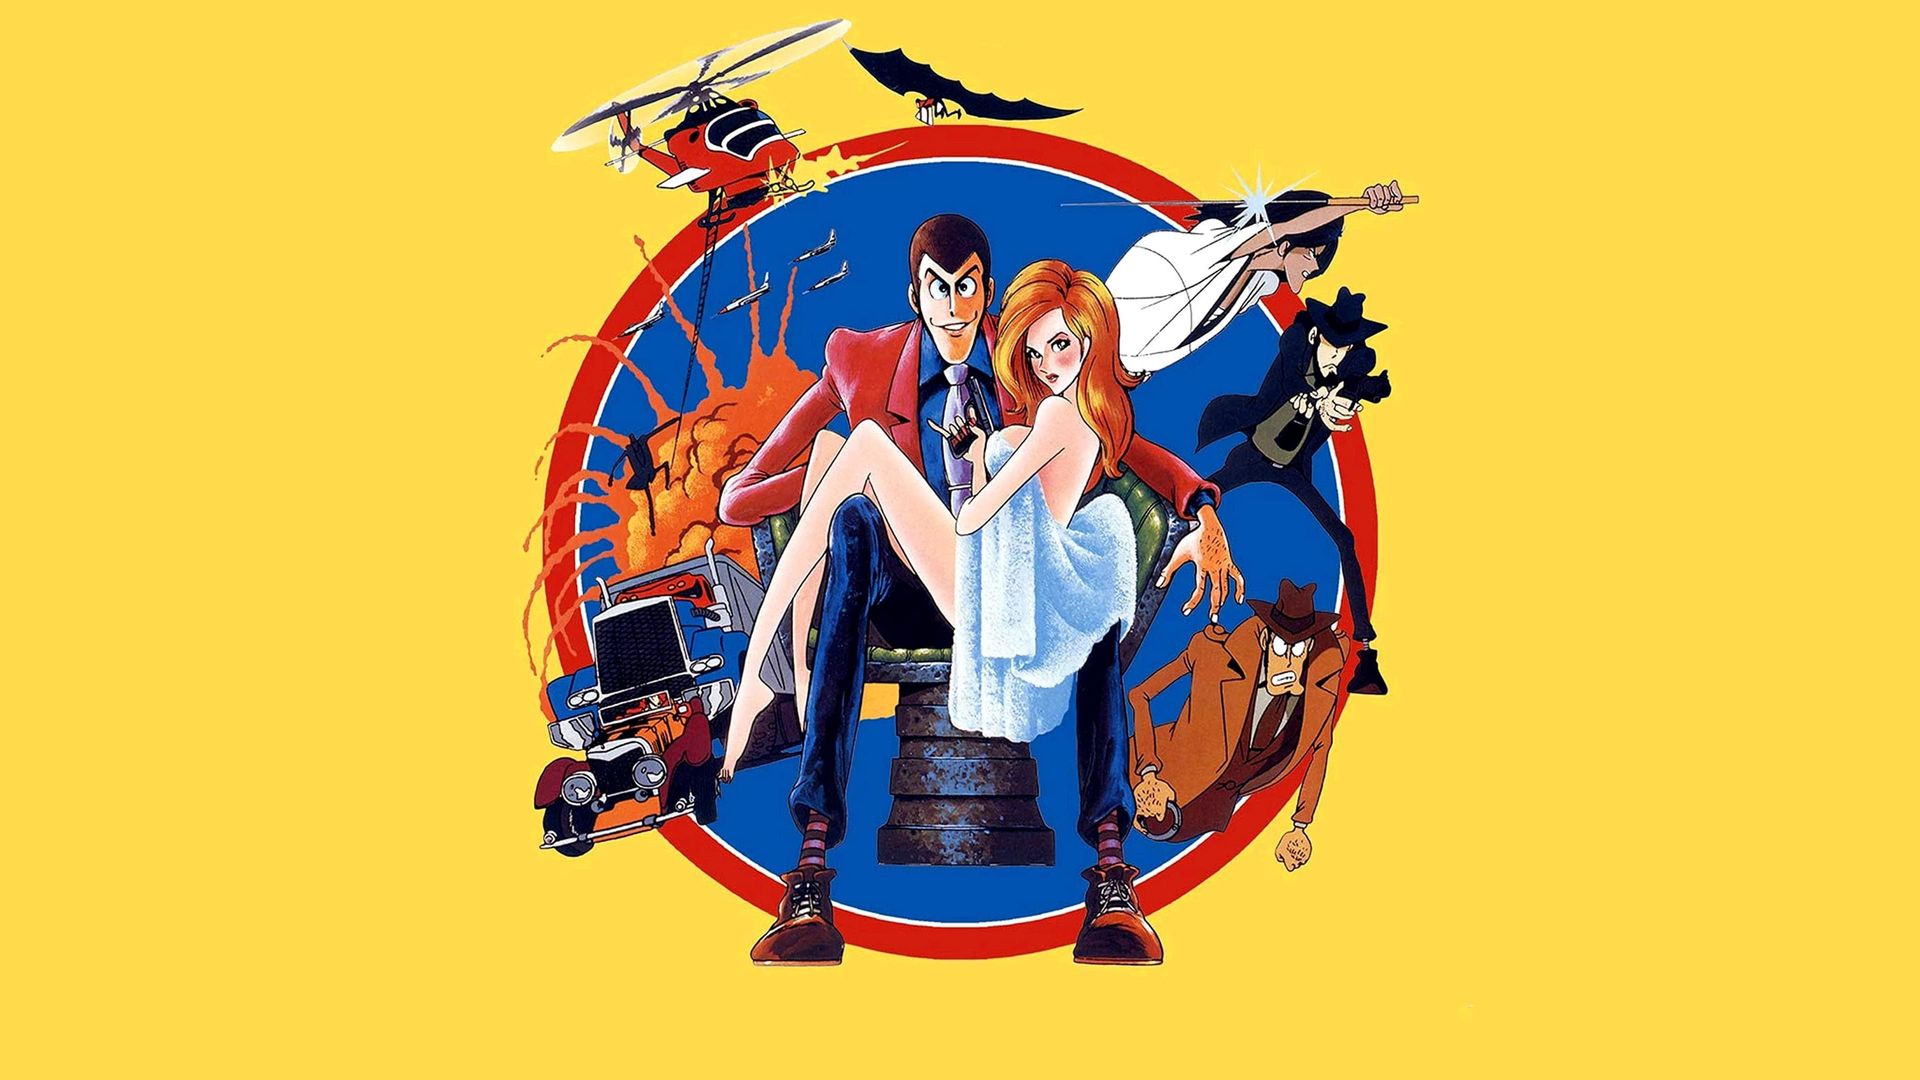 Lupin the 3rd: The Mystery of Mamo background